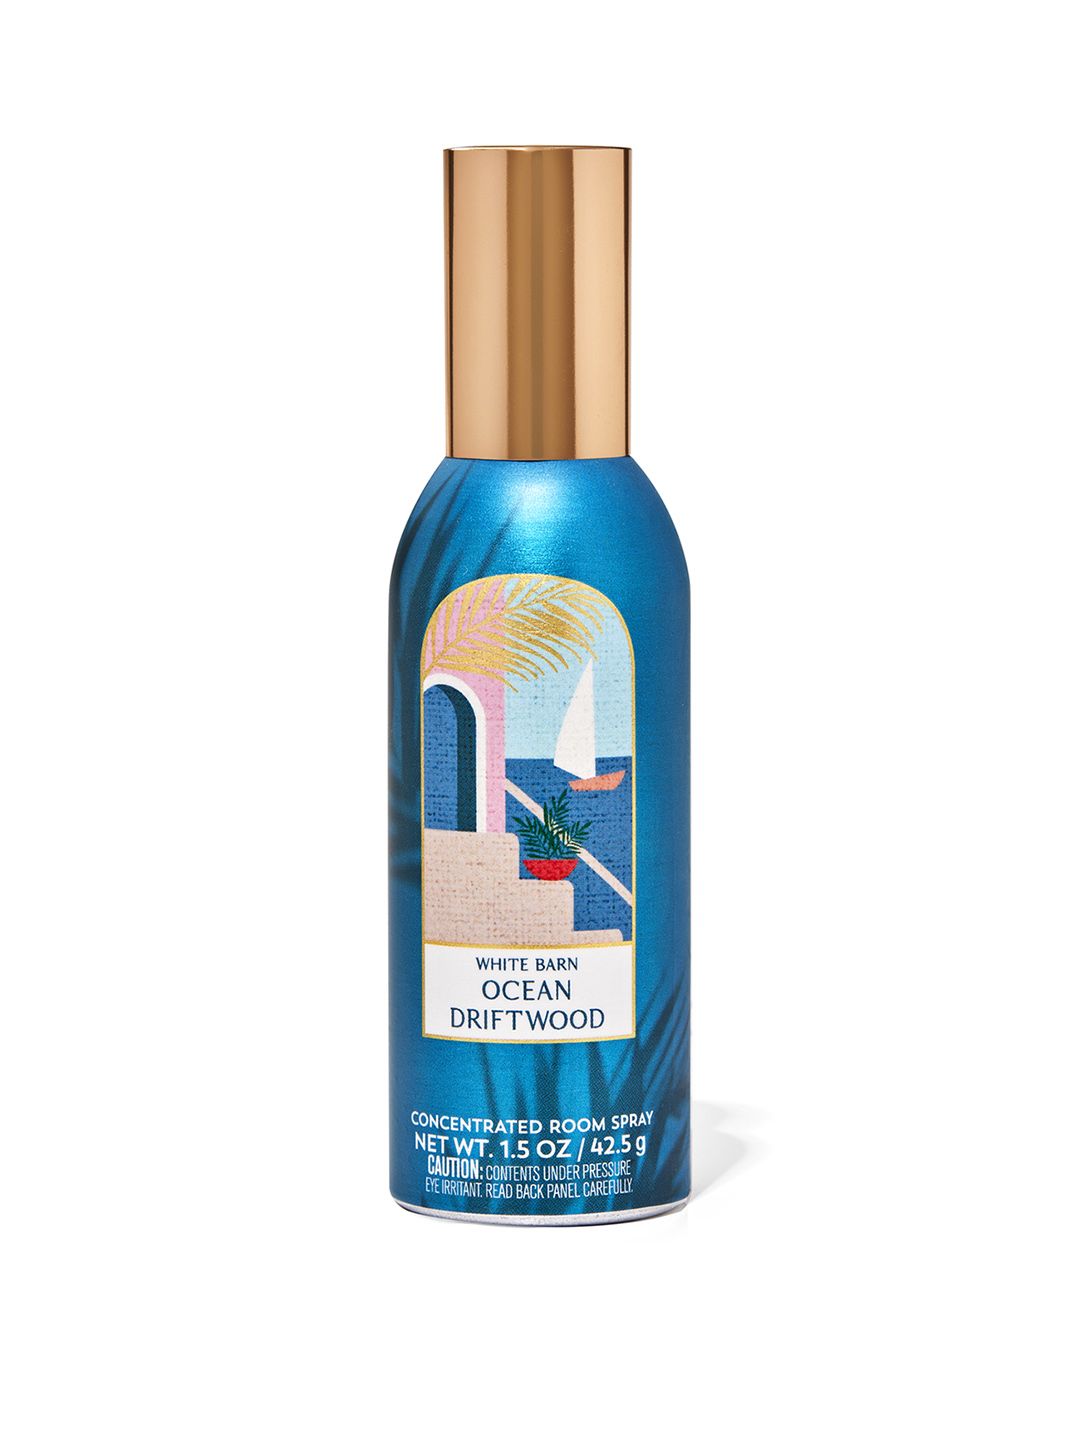 Bath & Body Works Ocean Driftwood Concentrated Room Spray - 42.5 g Price in India